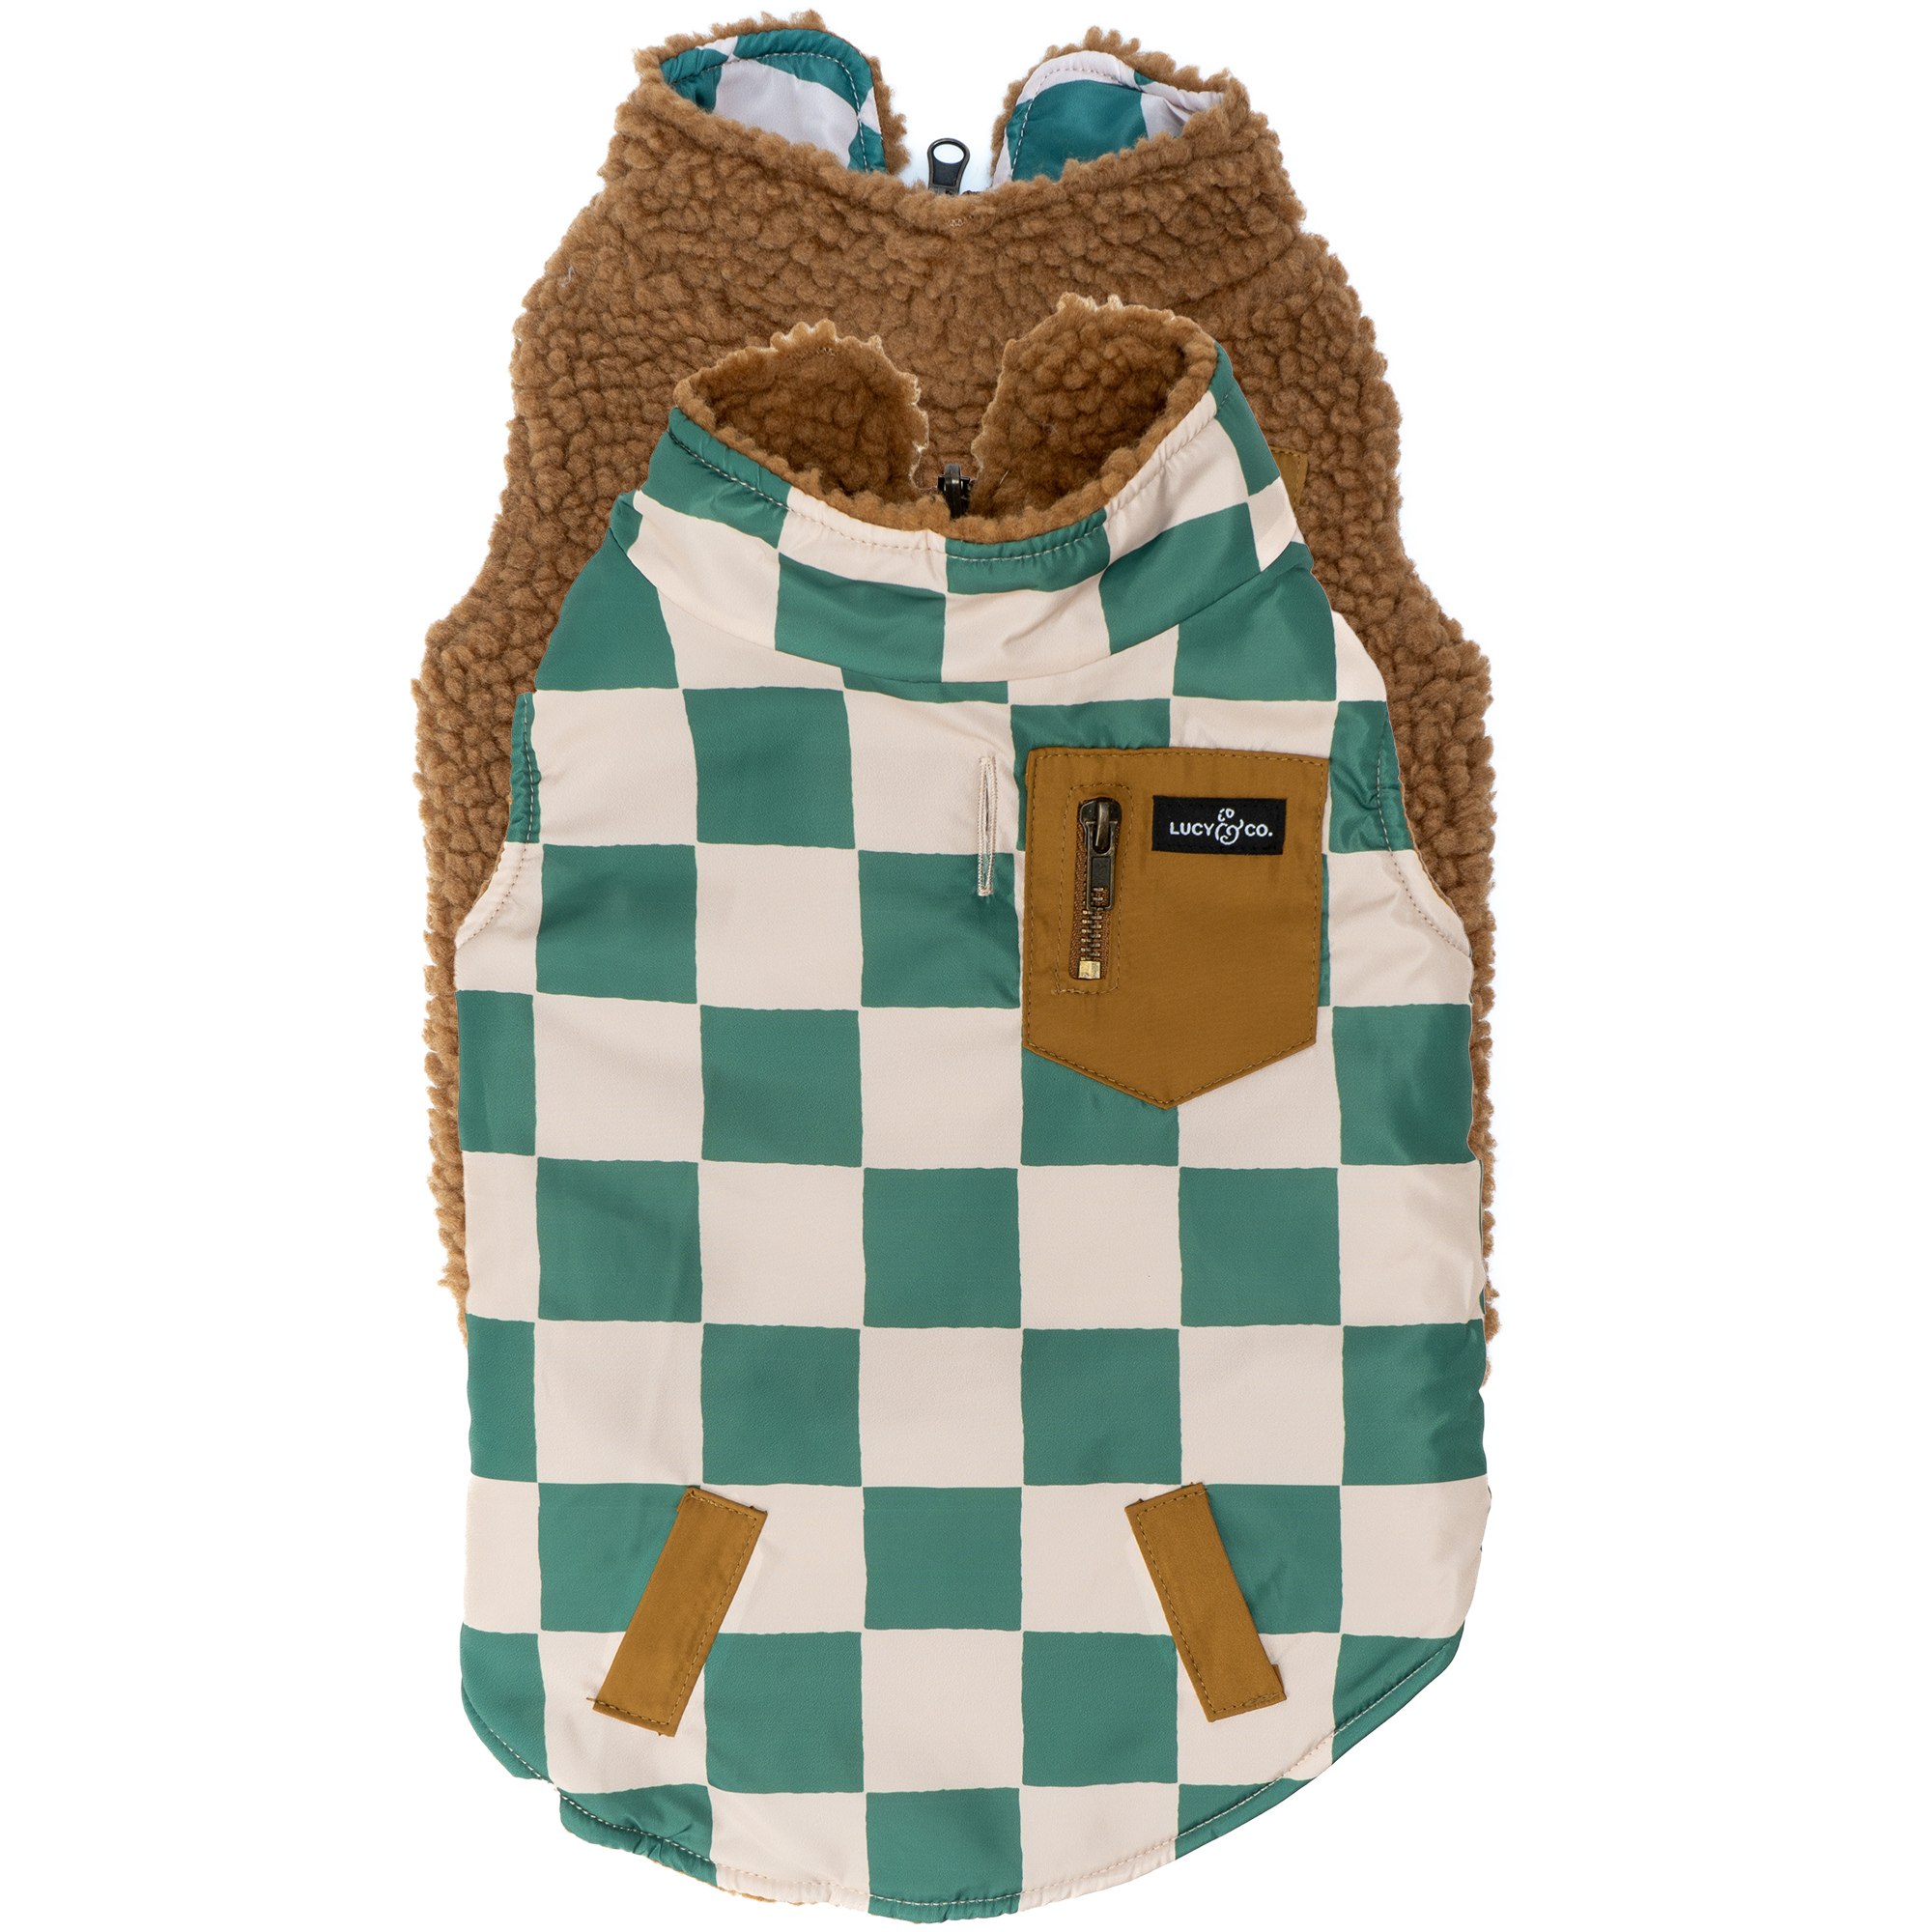 Lucy & Co. The You're a Square Reversible Teddy Vest